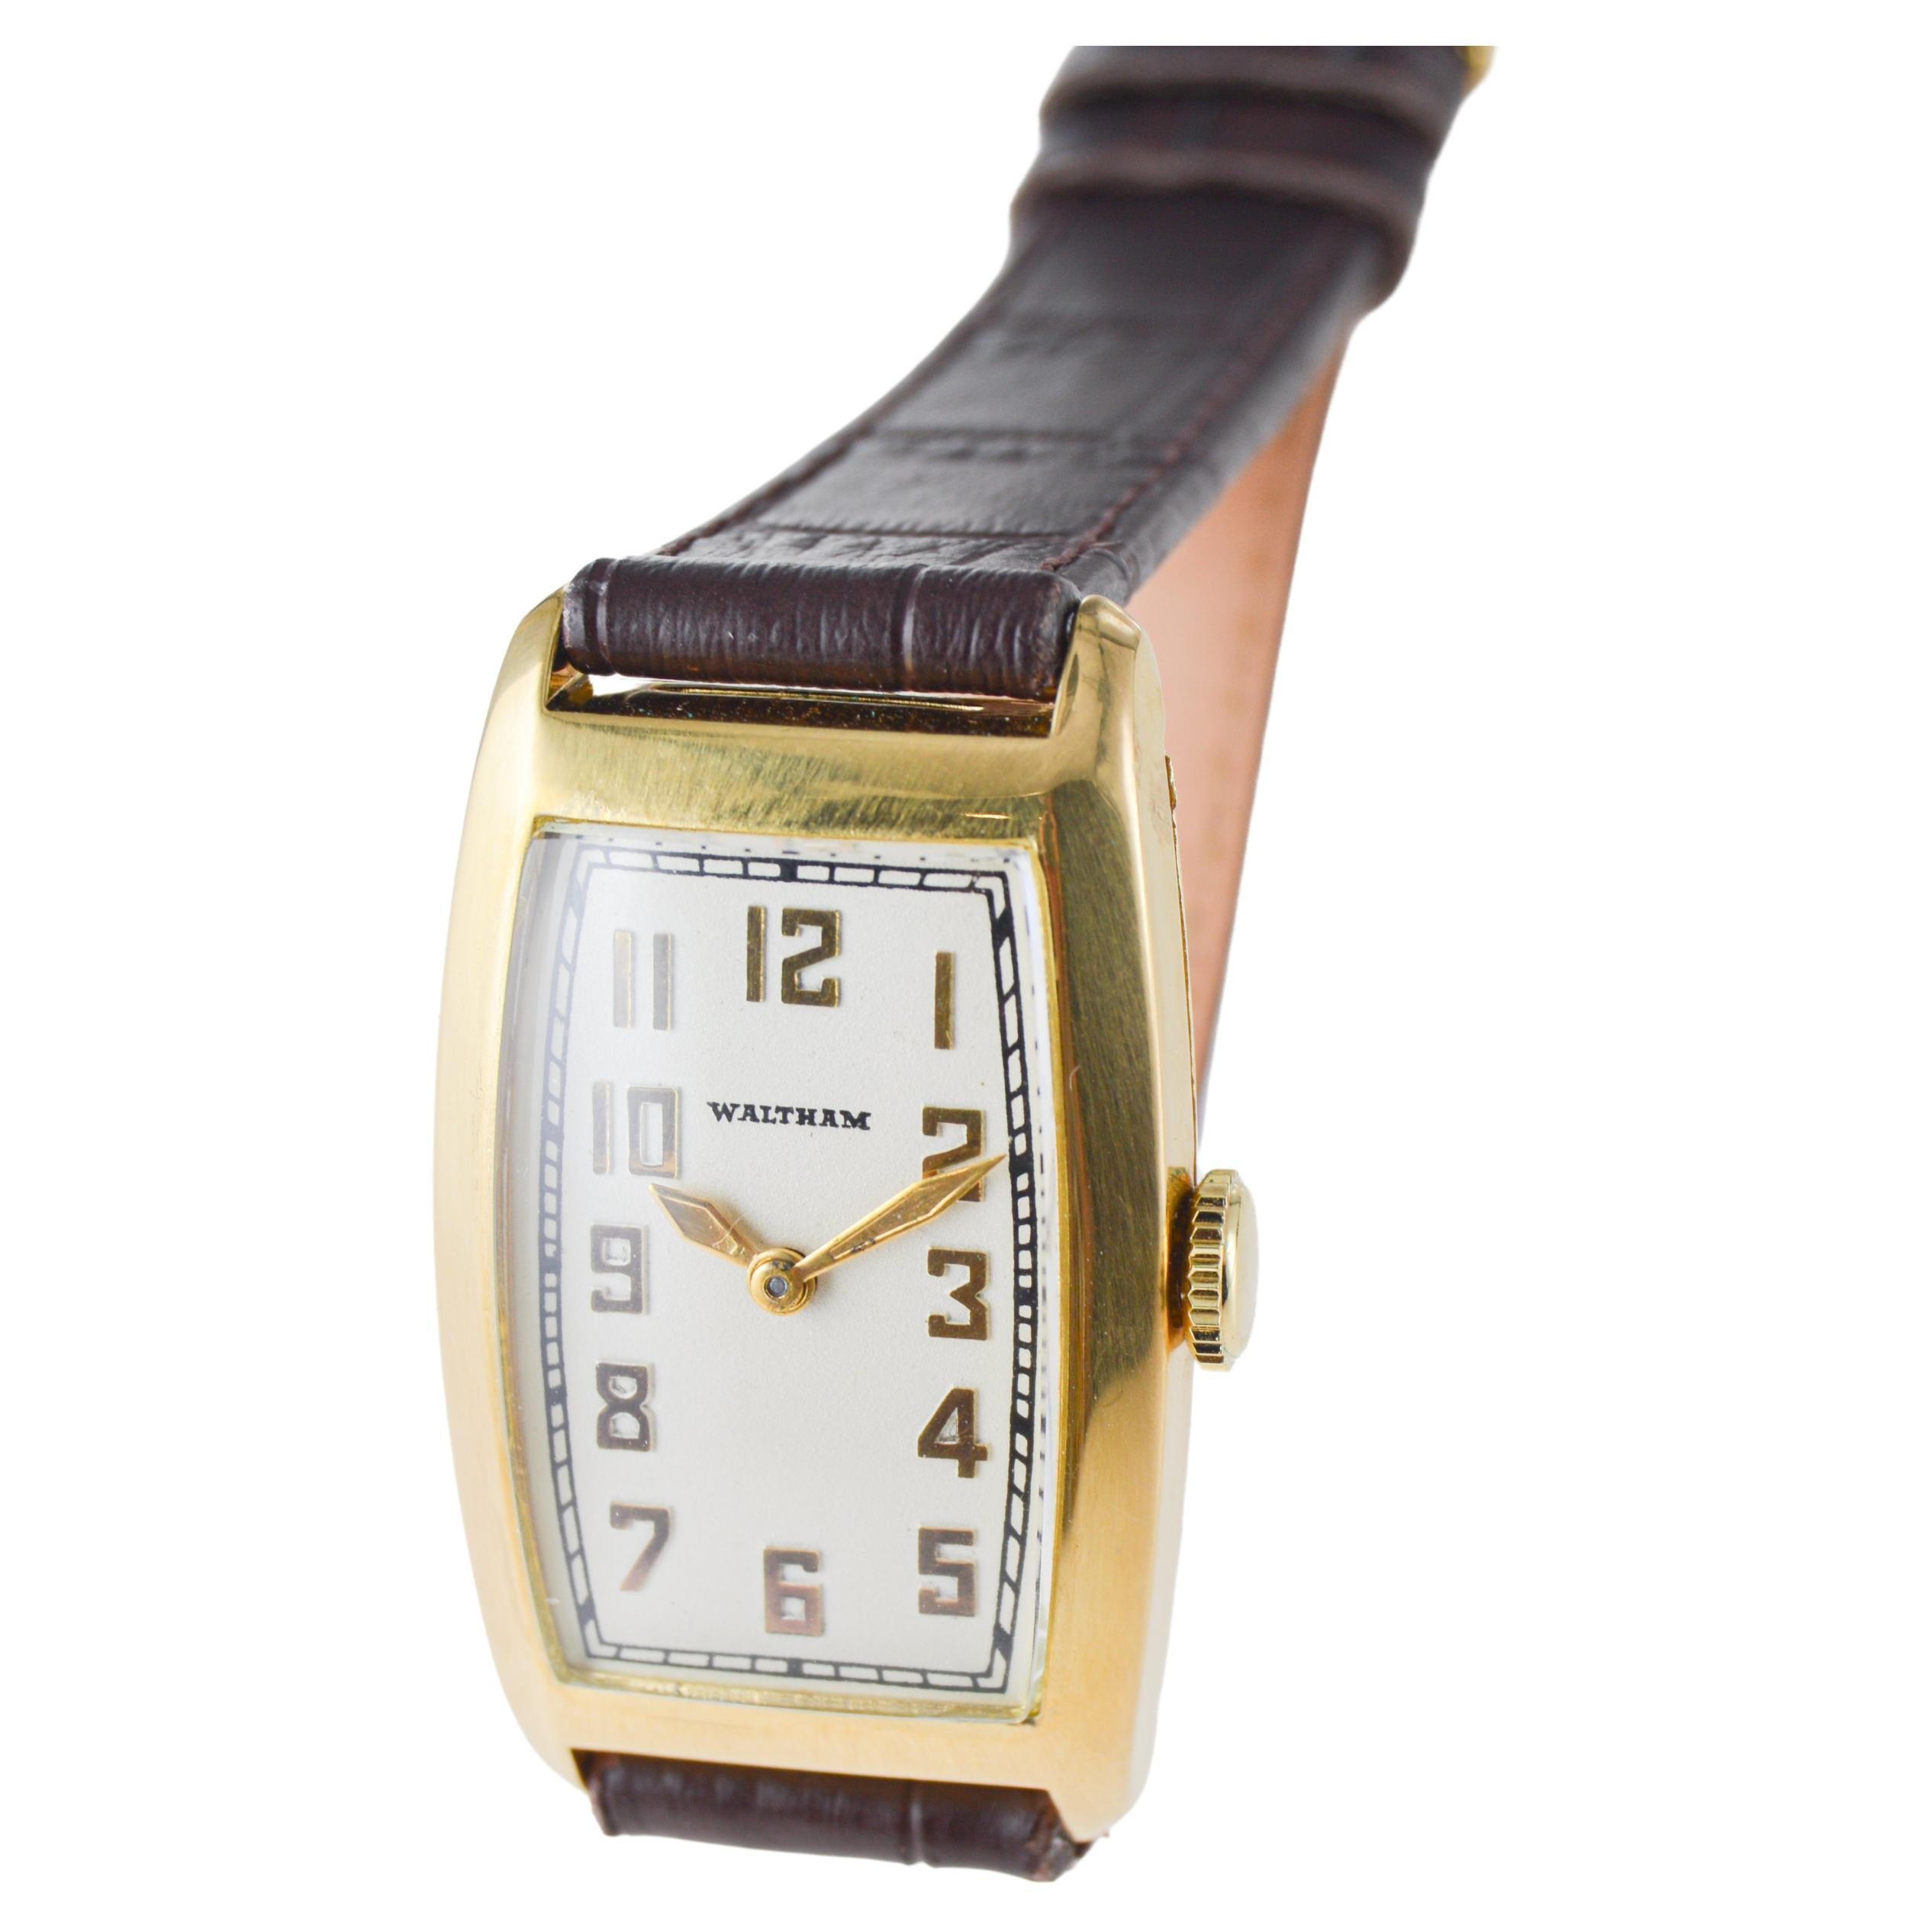 Waltham Gold Filled Art Deco Tonneau Watch with Flawless Original Dial From 1934 For Sale 2